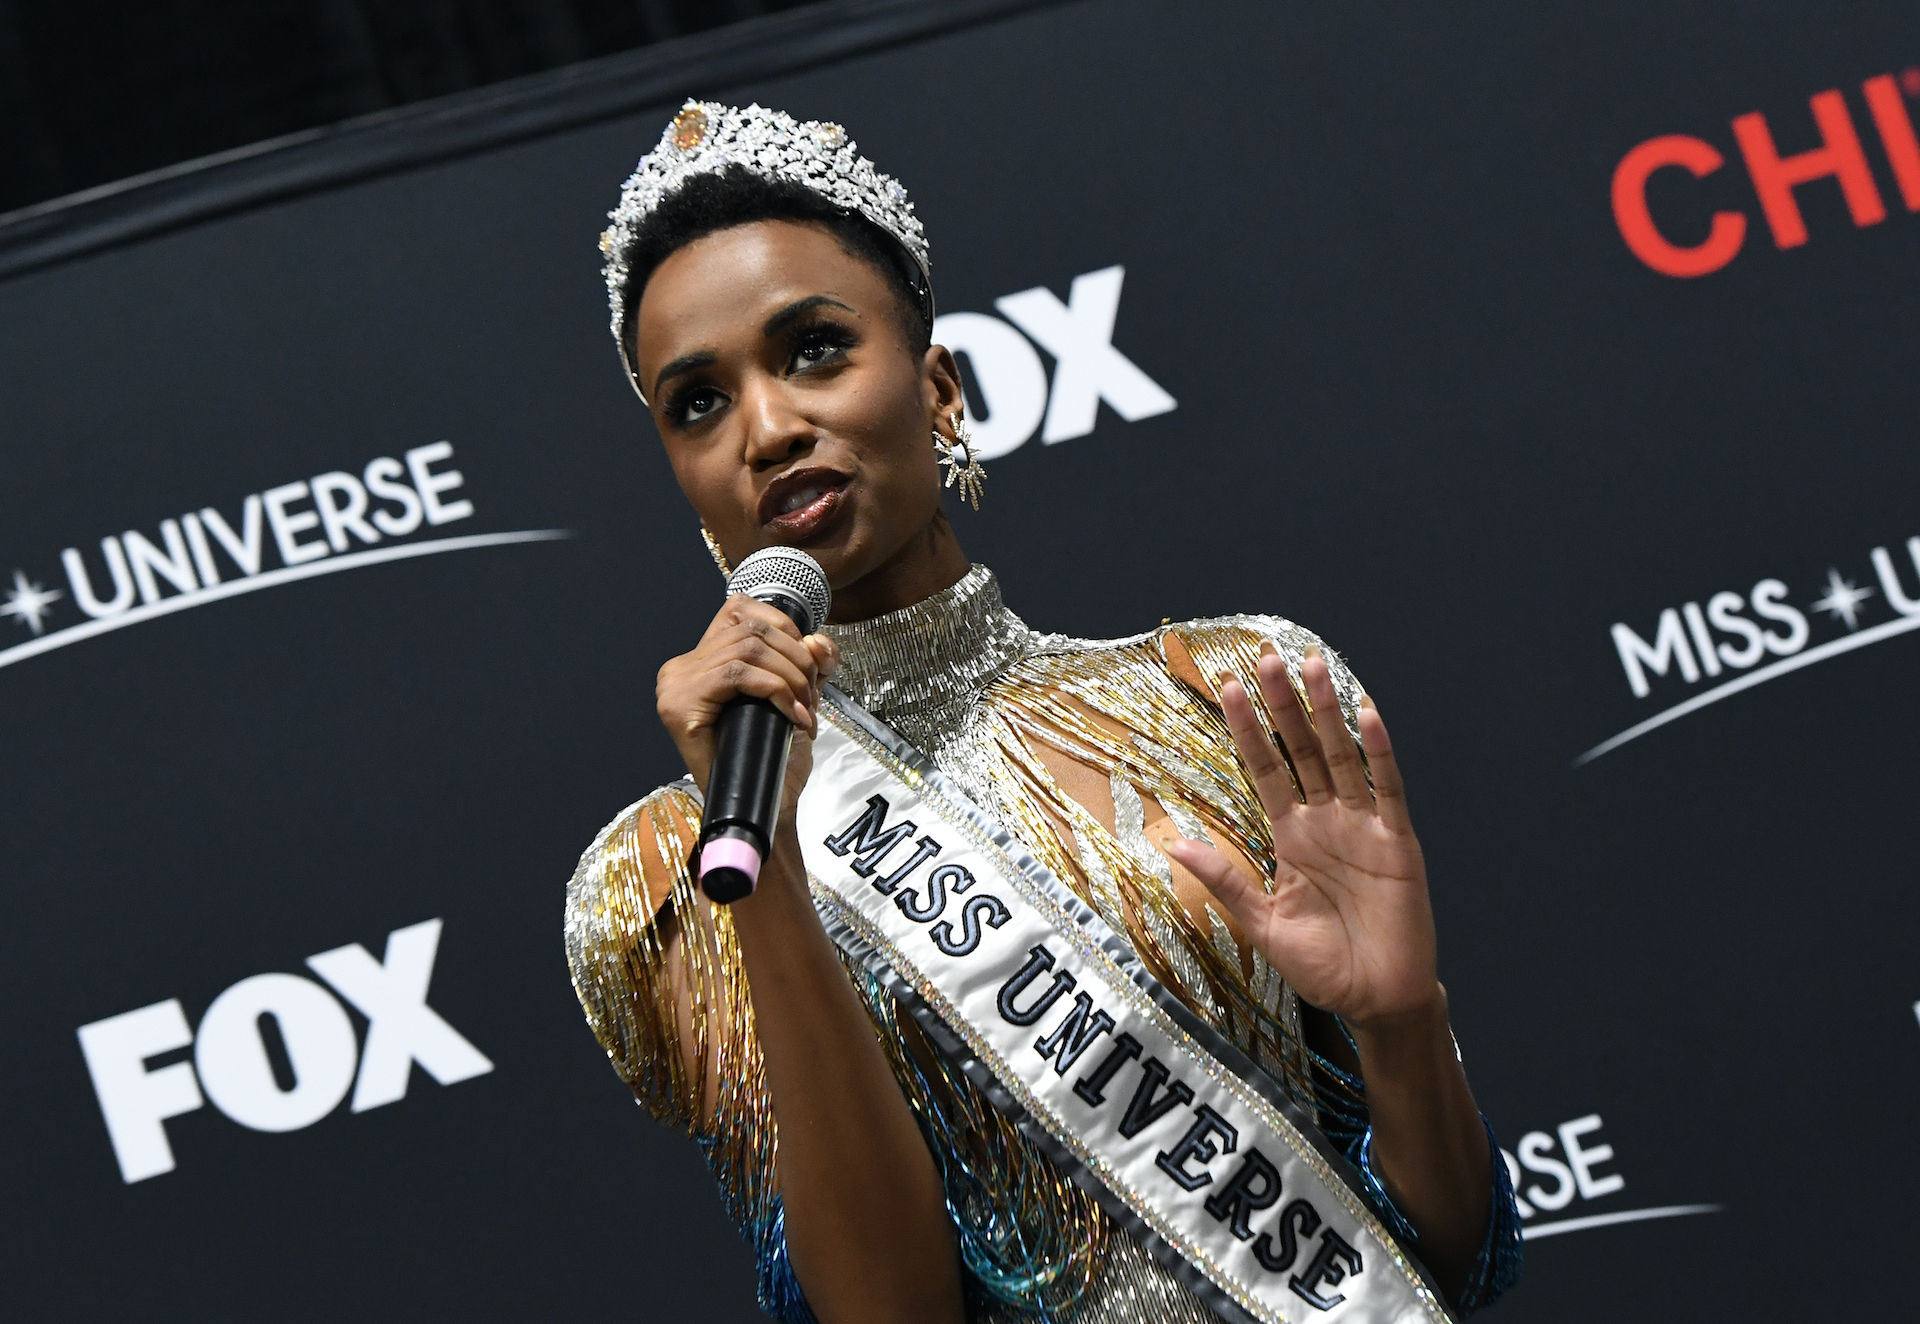 Miss South Africa Pageant Praised For Opening To Trans Women Entrants